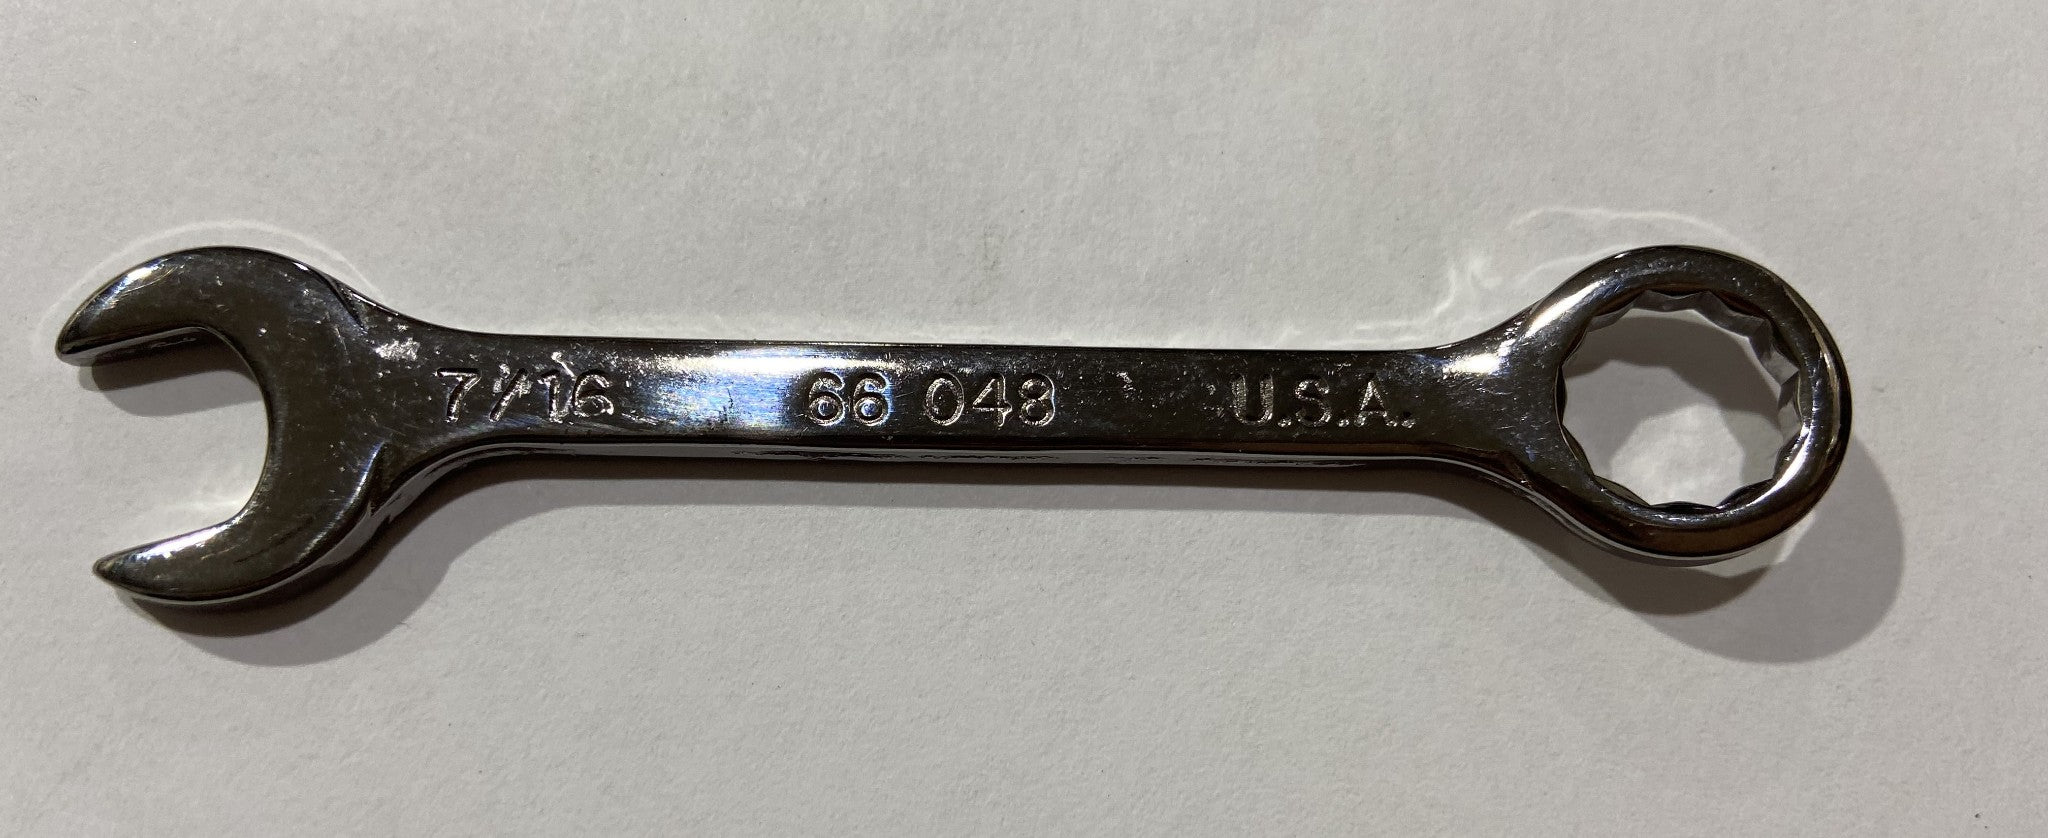 Unbranded 66 048 7/16" 12pt combination wrench USA #86